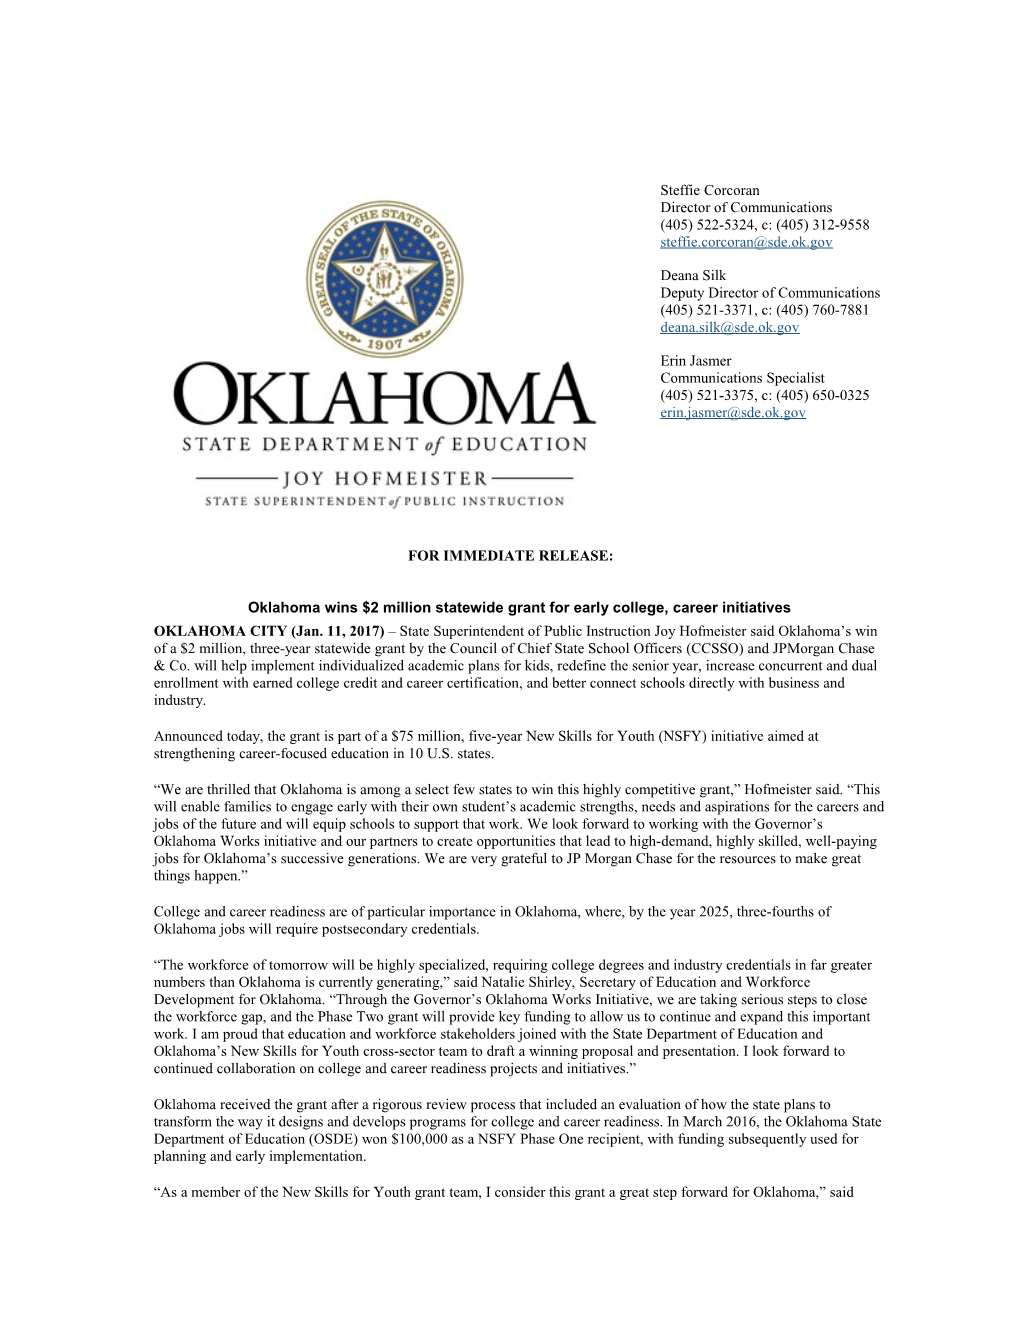 Oklahoma Wins $2 Million Statewide Grant for Early College, Career Initiatives